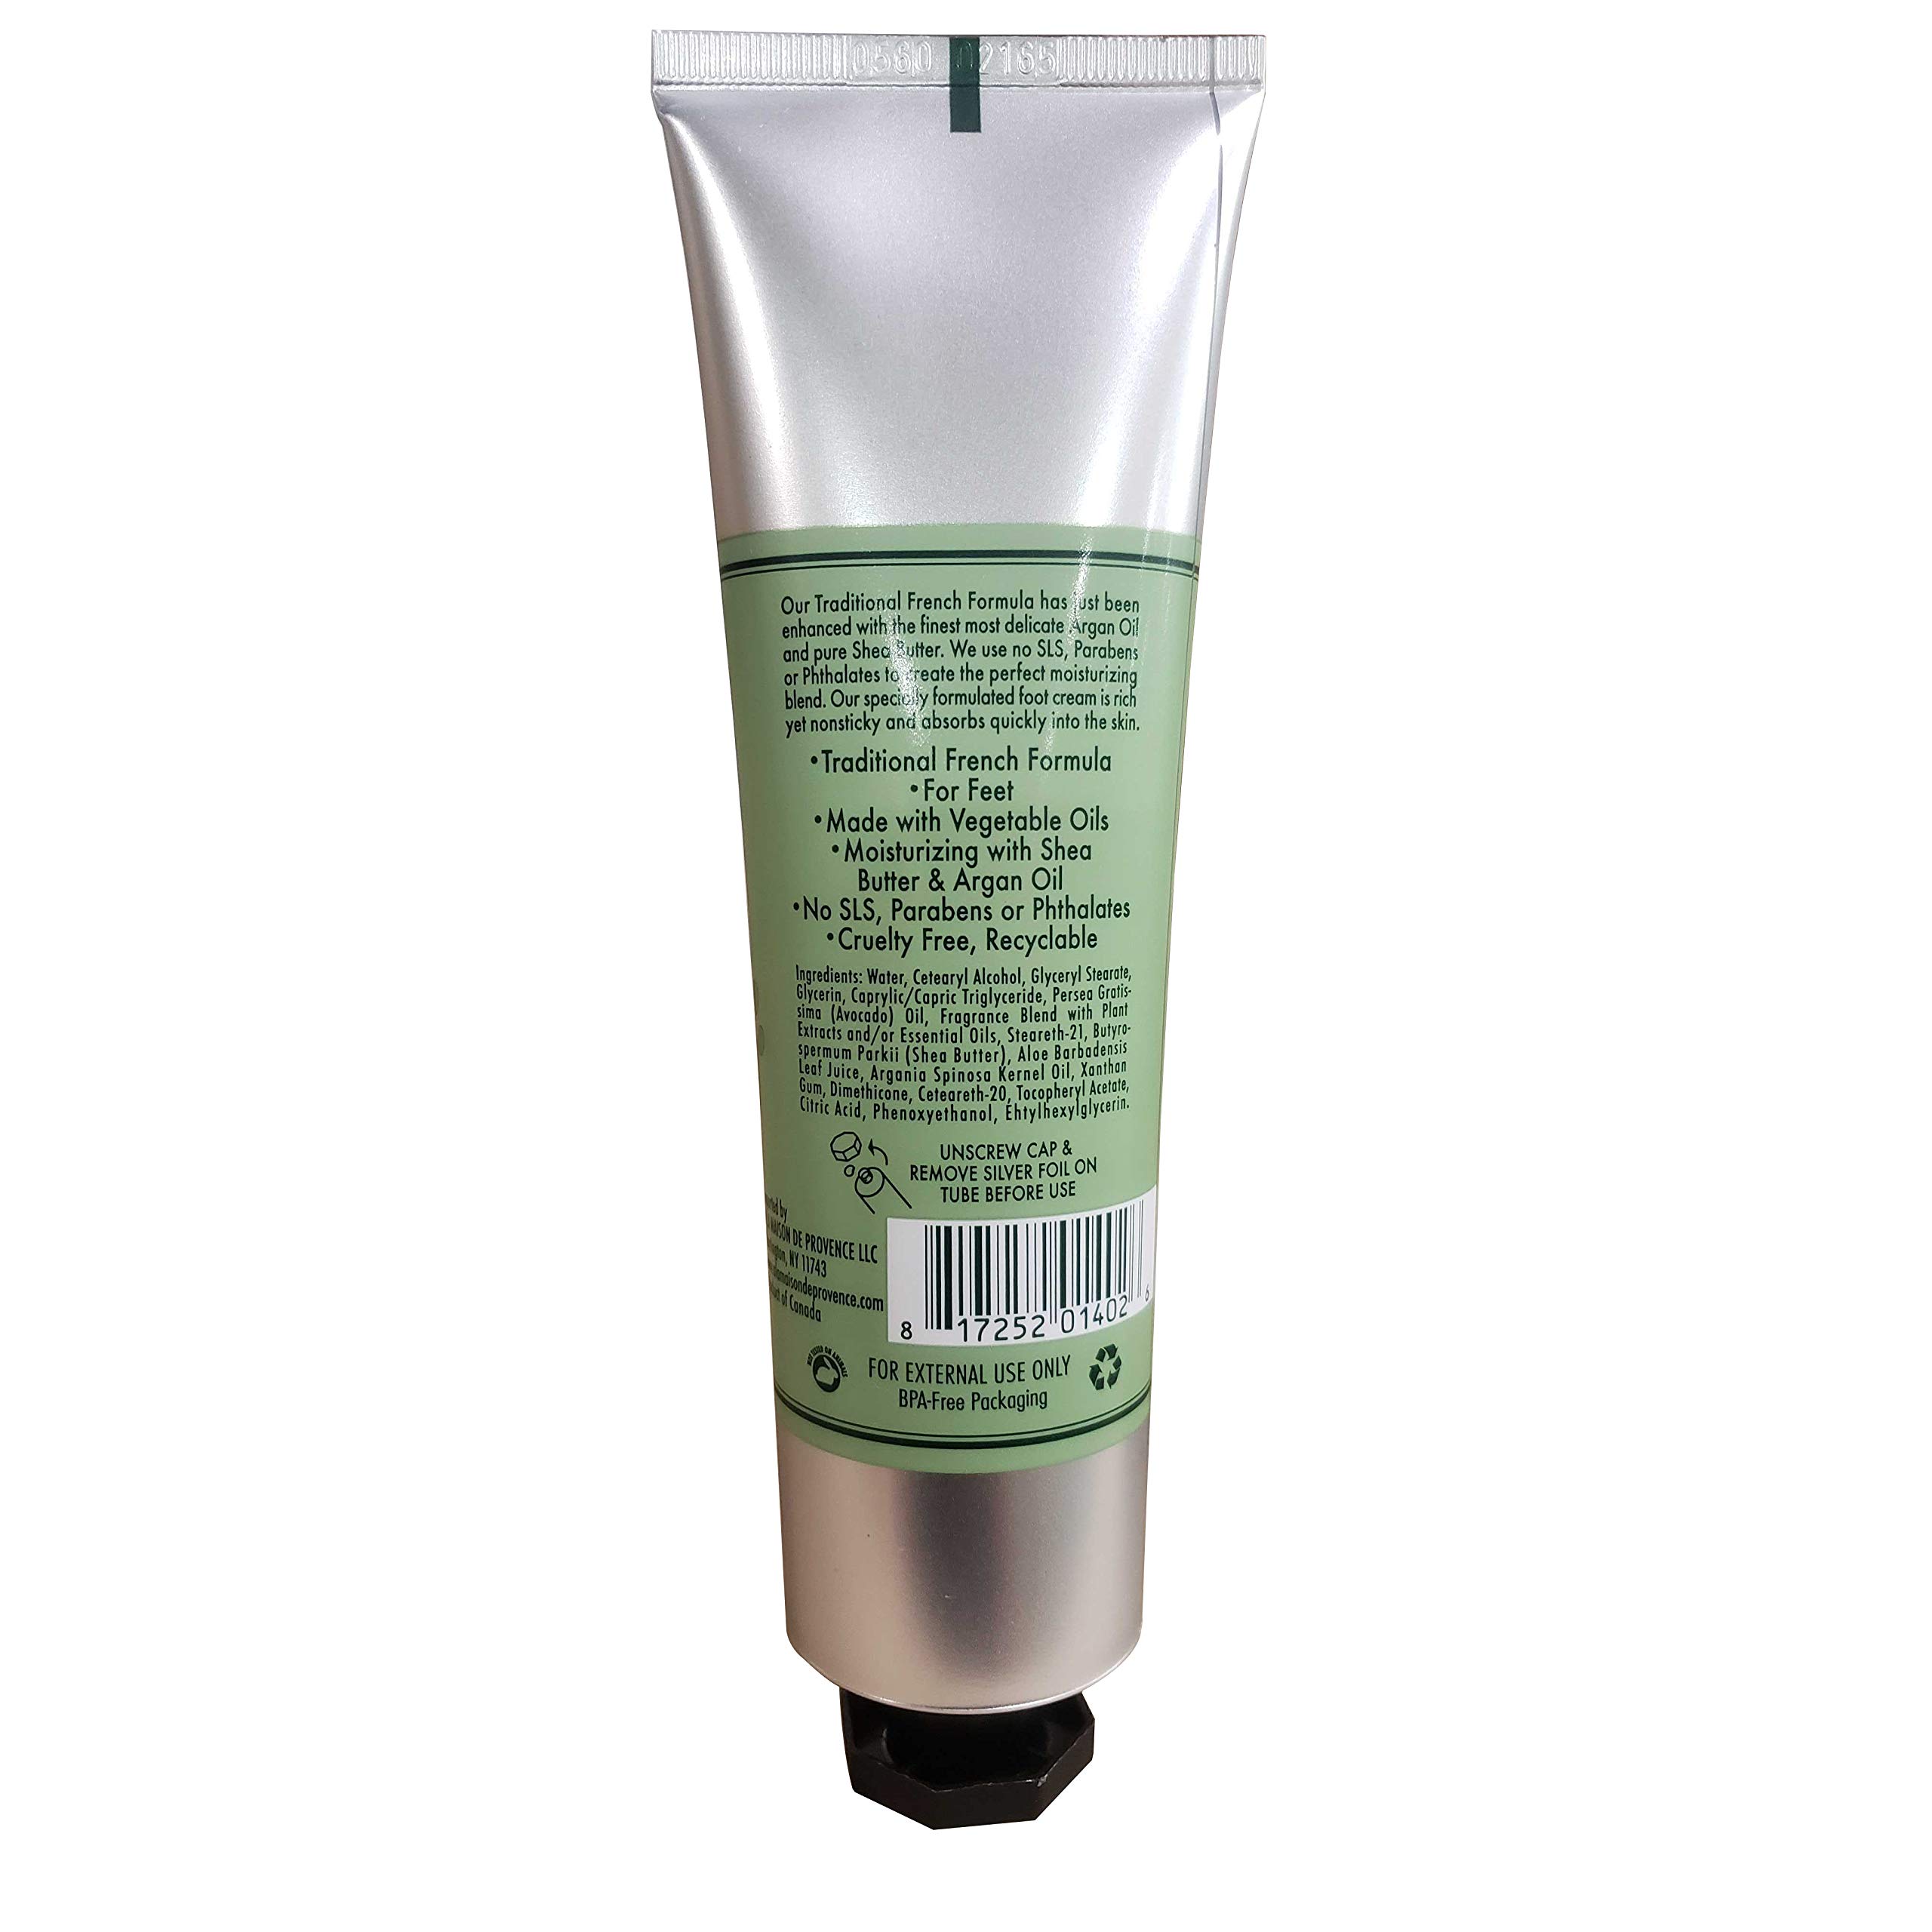 A LA MAISON Peppermint Tea Tree Foot Cream Lotion for Dry Skin - Traditional French Natural Hand and Foot Lotion (1 Pack, 5 oz Bottle)